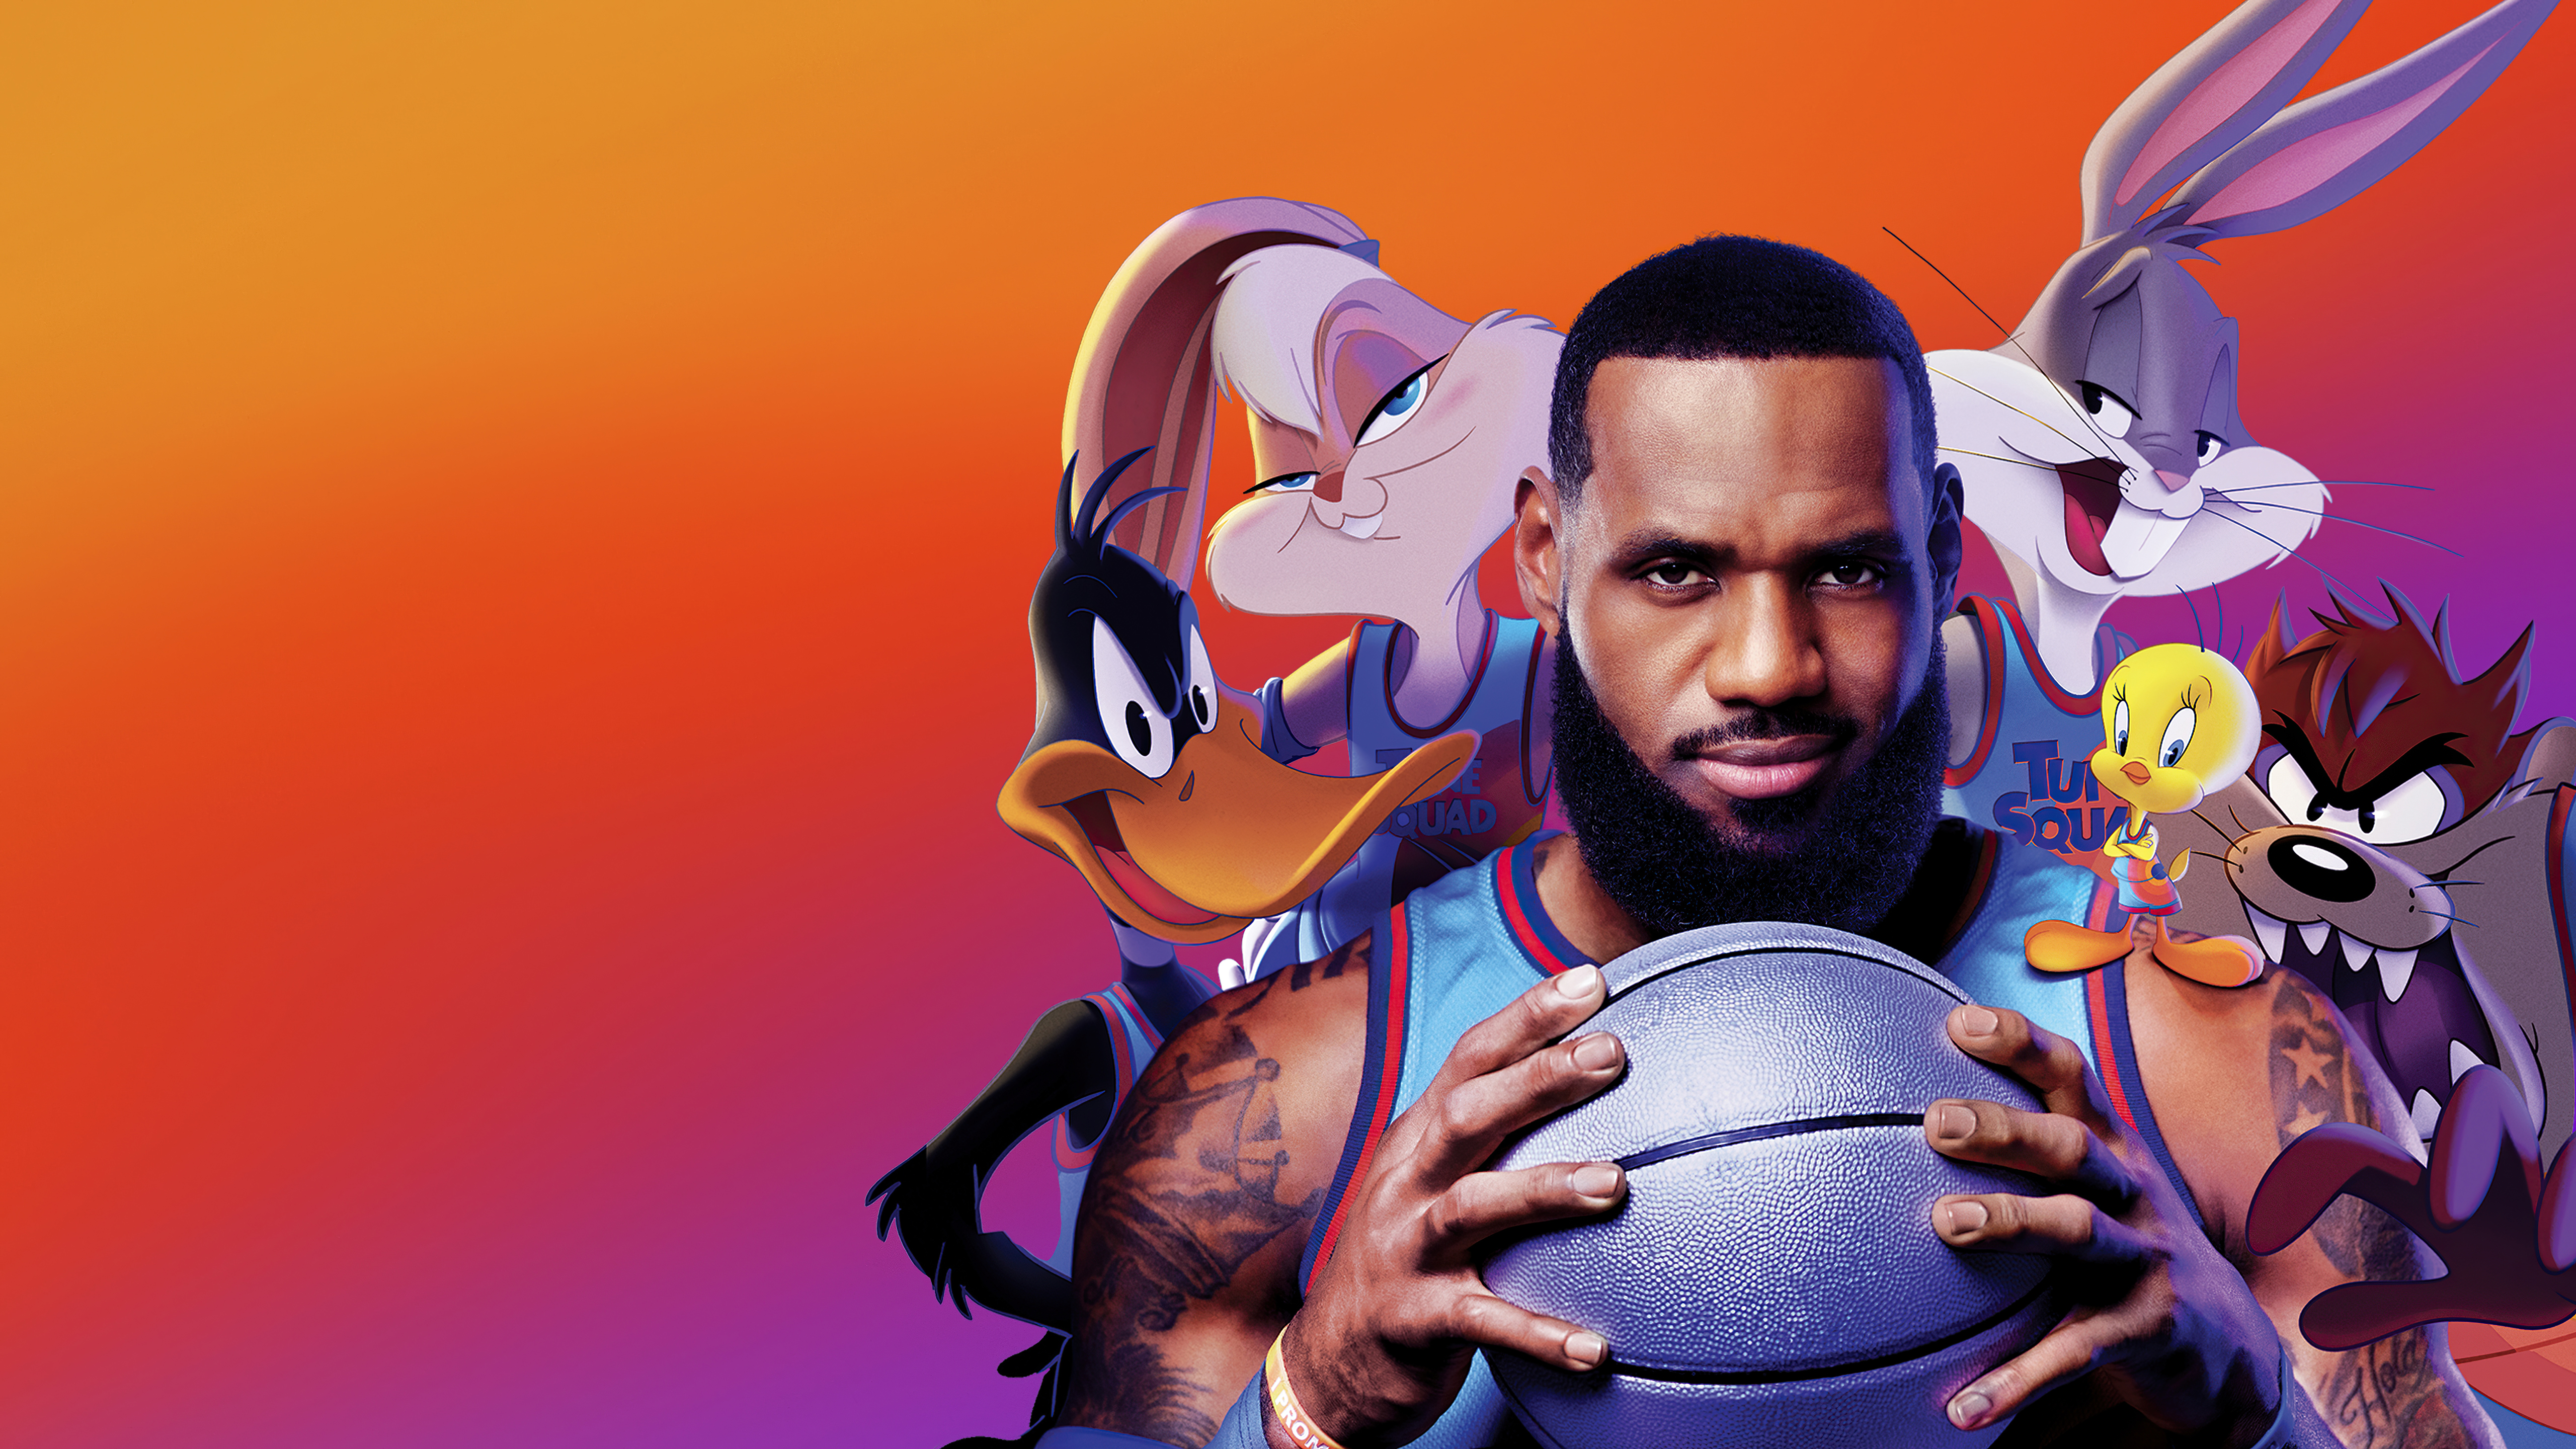 Space Jam 2 HD Wallpapers and Backgrounds. 